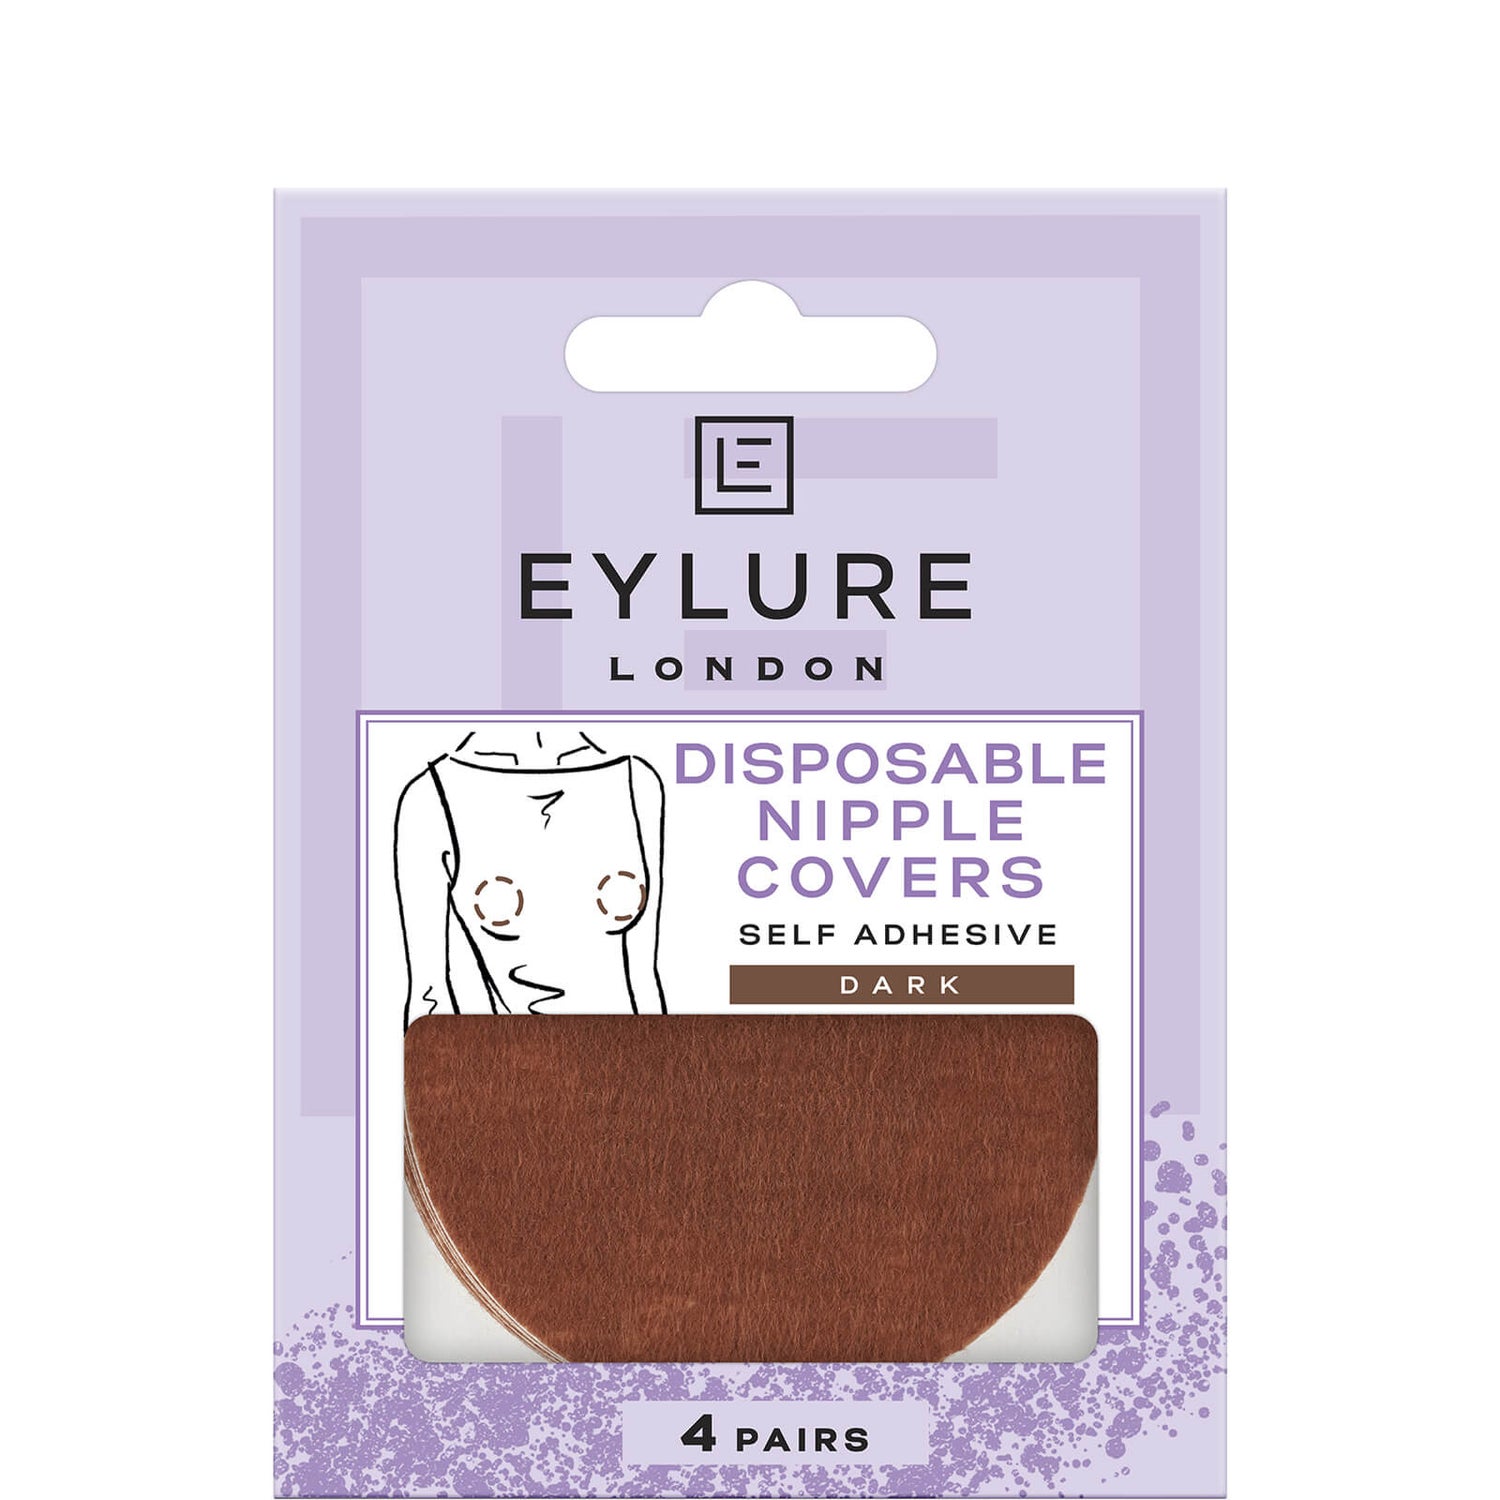 Eylure Disposable Nipple Cover - Dark - FREE Delivery